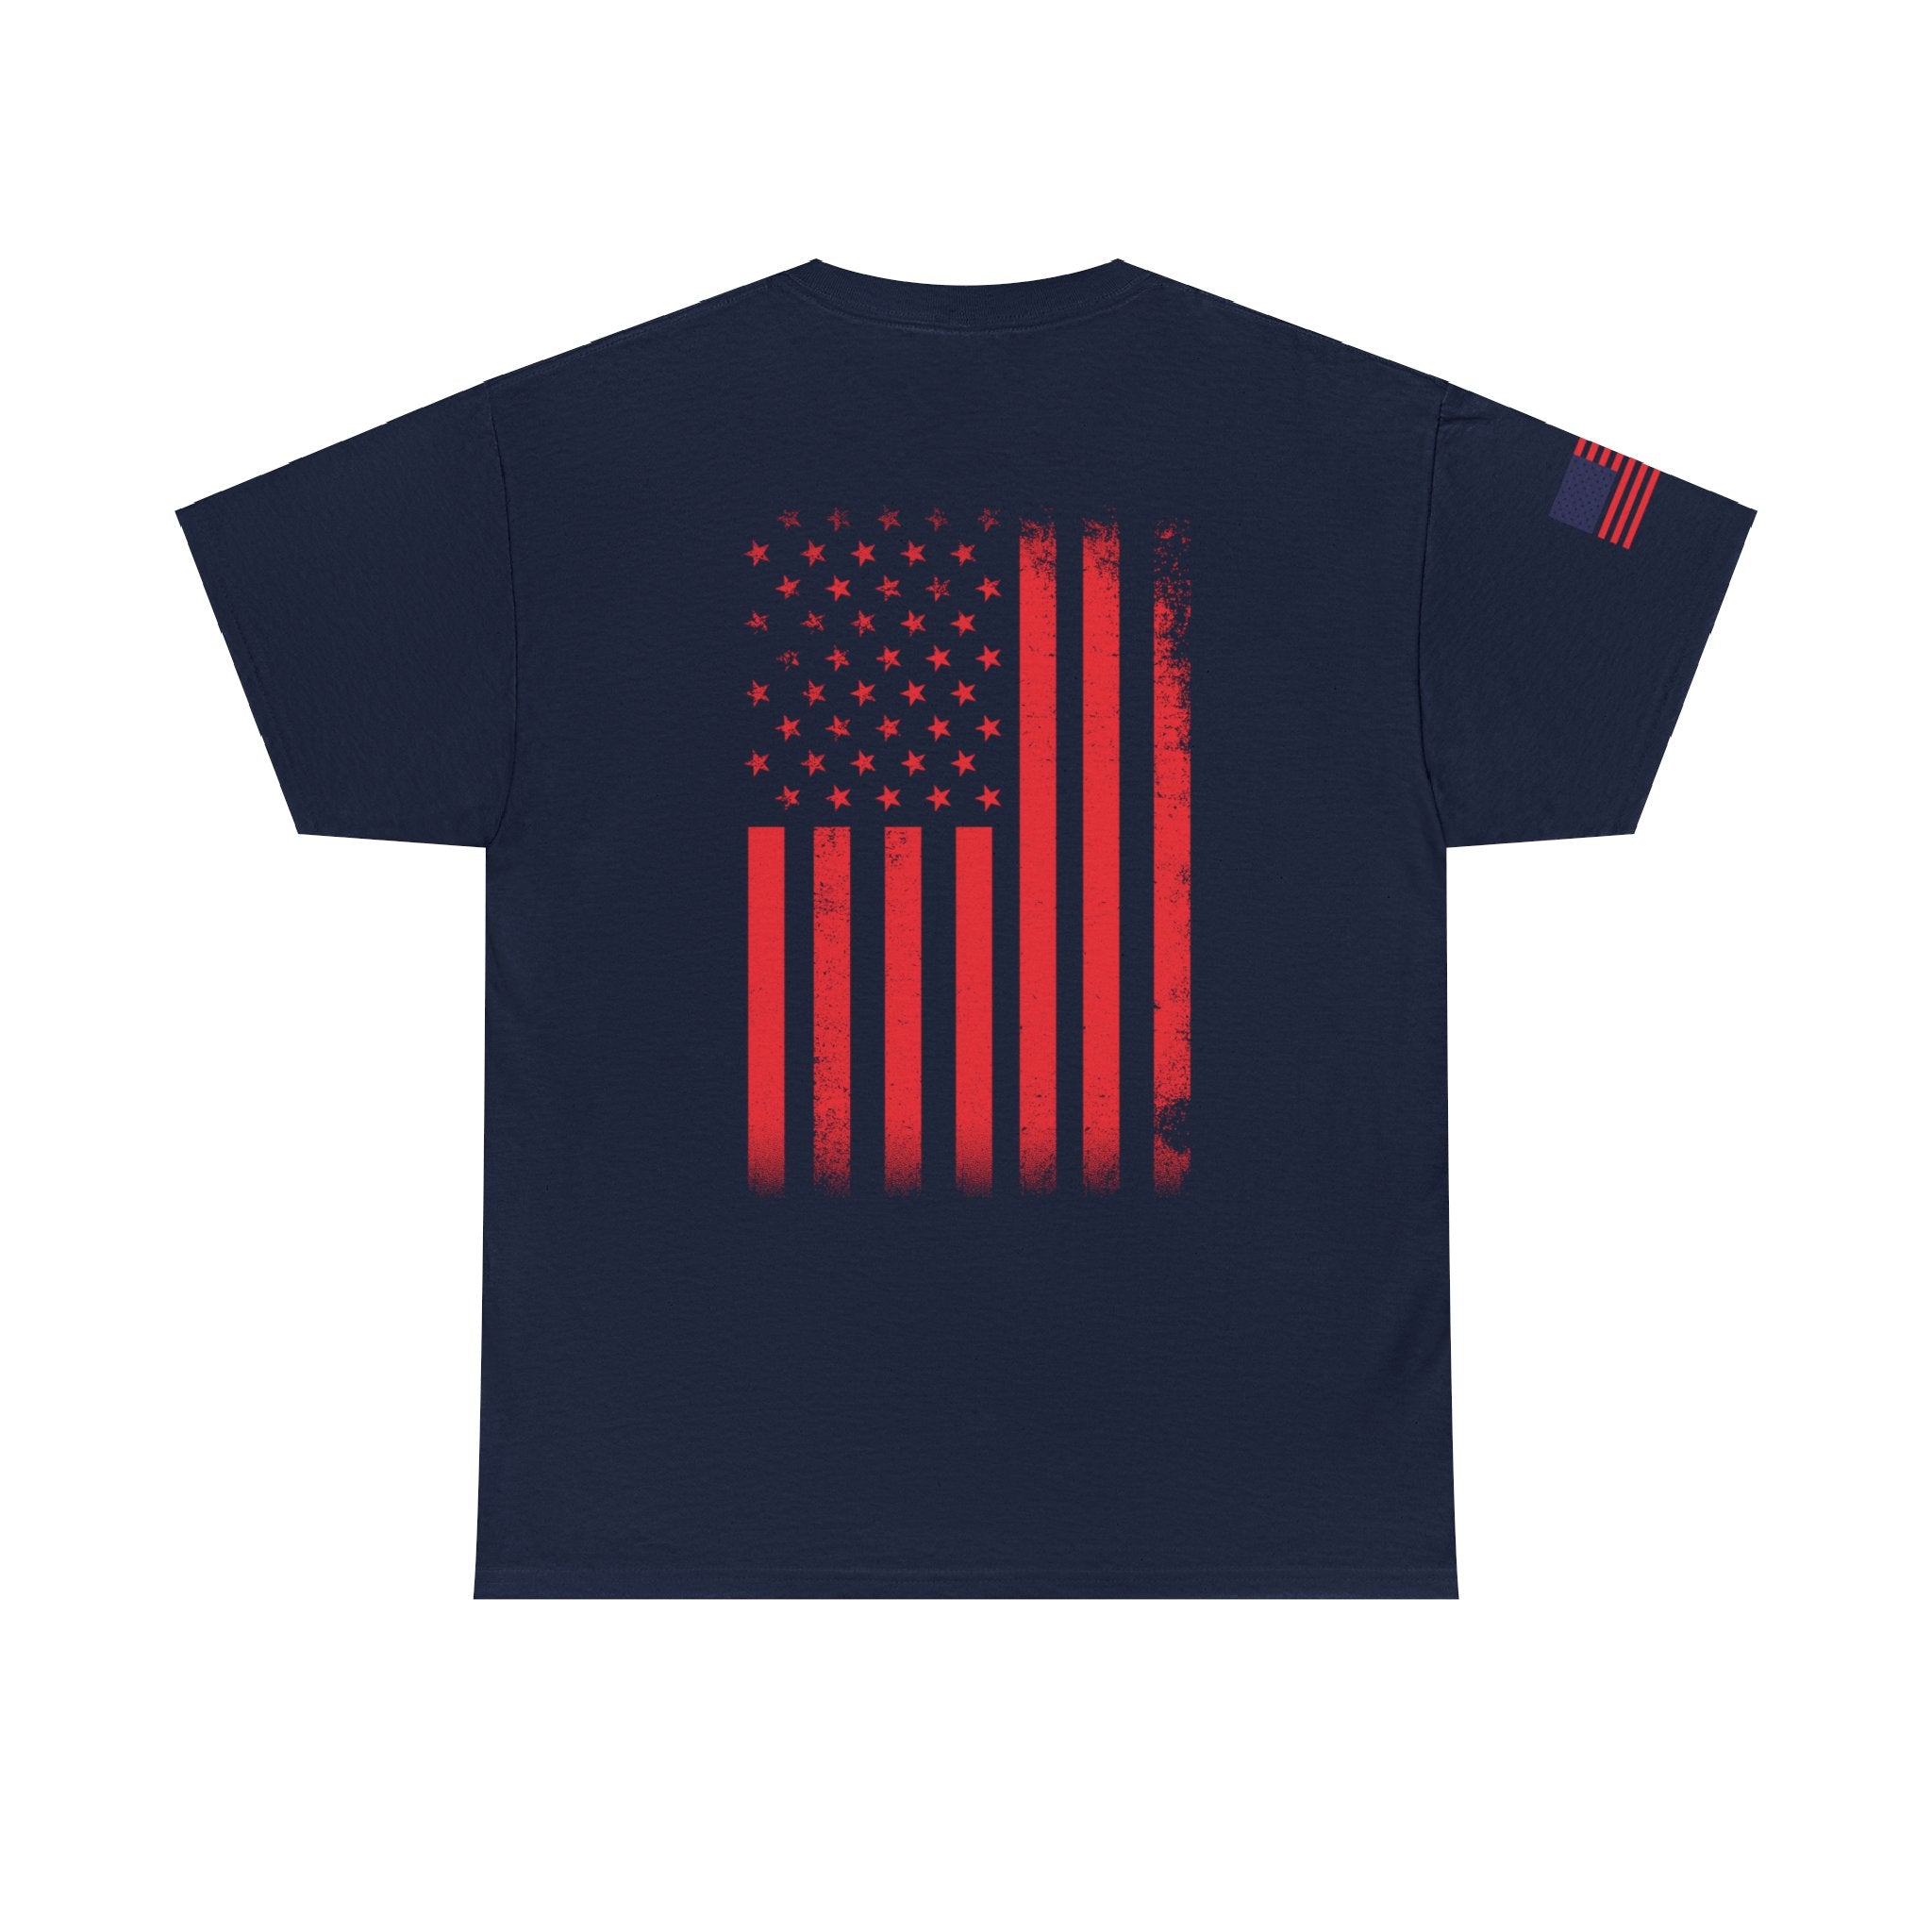 We the People T-shirt